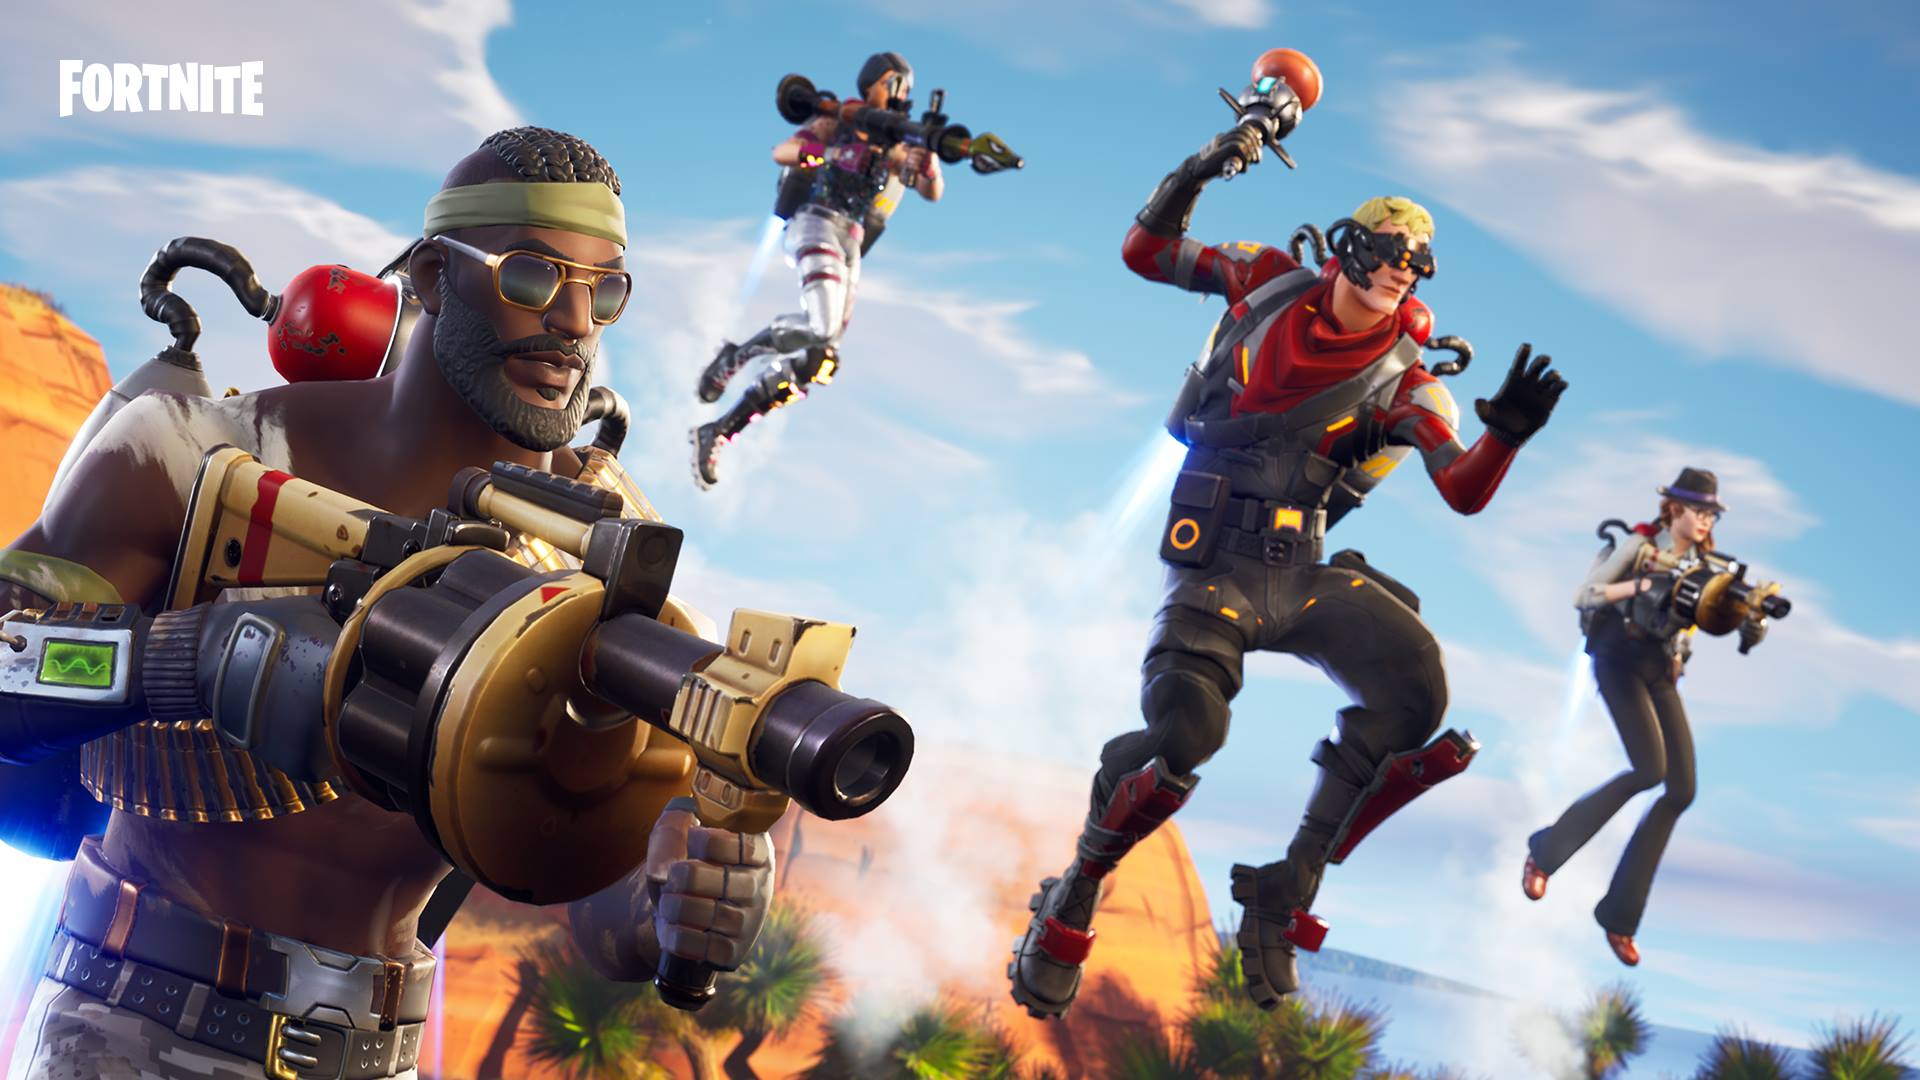 Google Play Warns Users That Fortnite Isn't Available on the Play Store